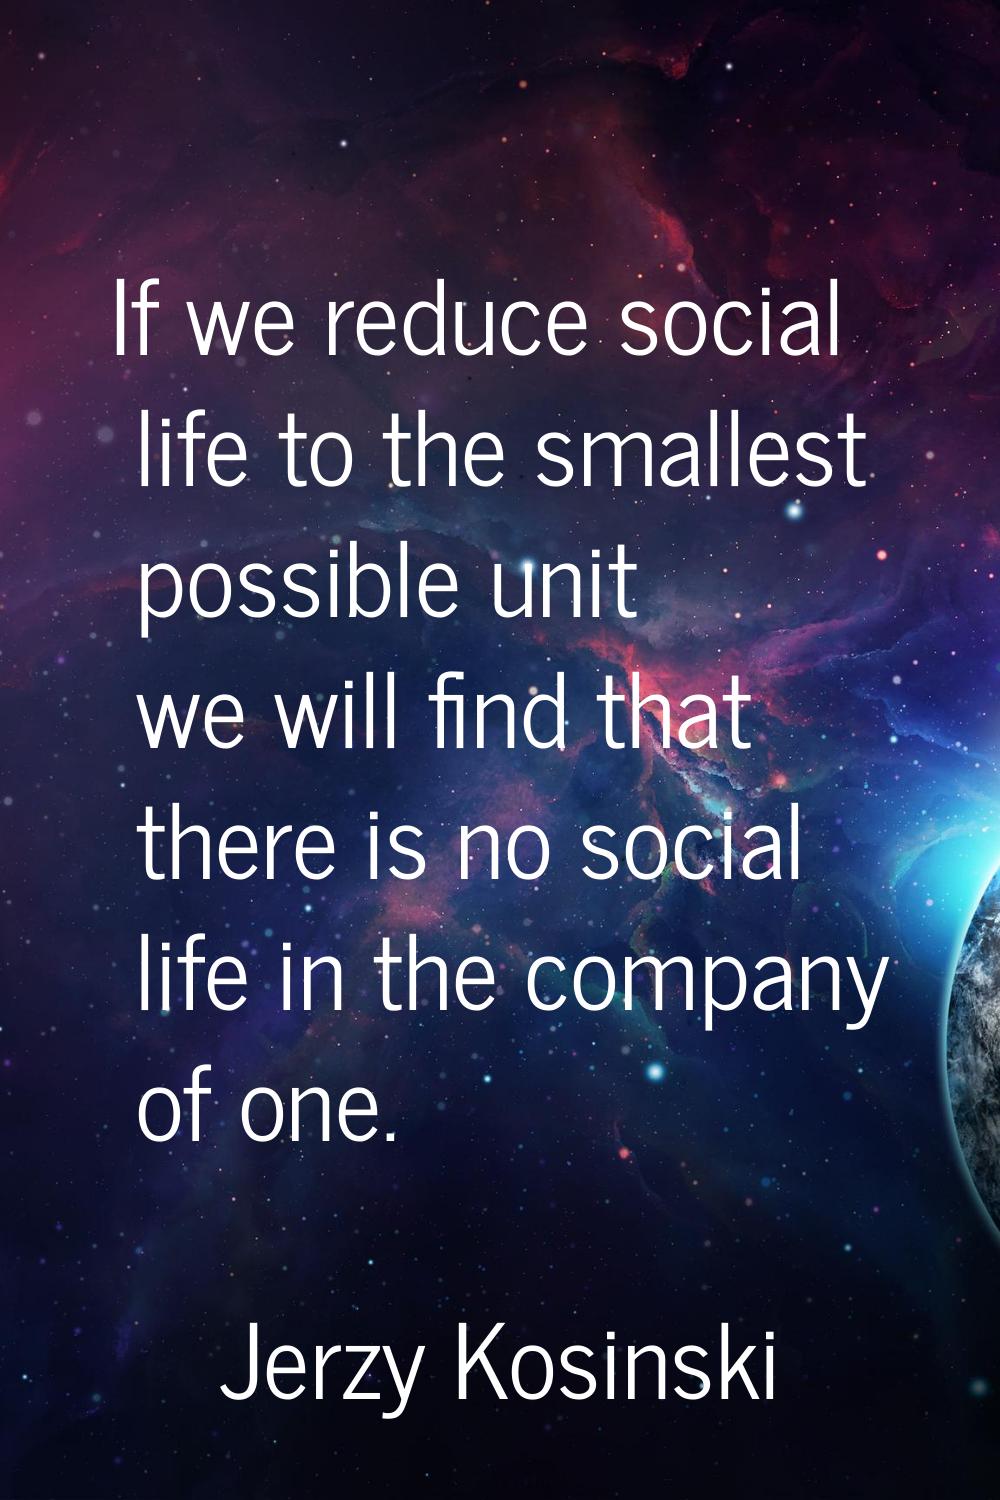 If we reduce social life to the smallest possible unit we will find that there is no social life in